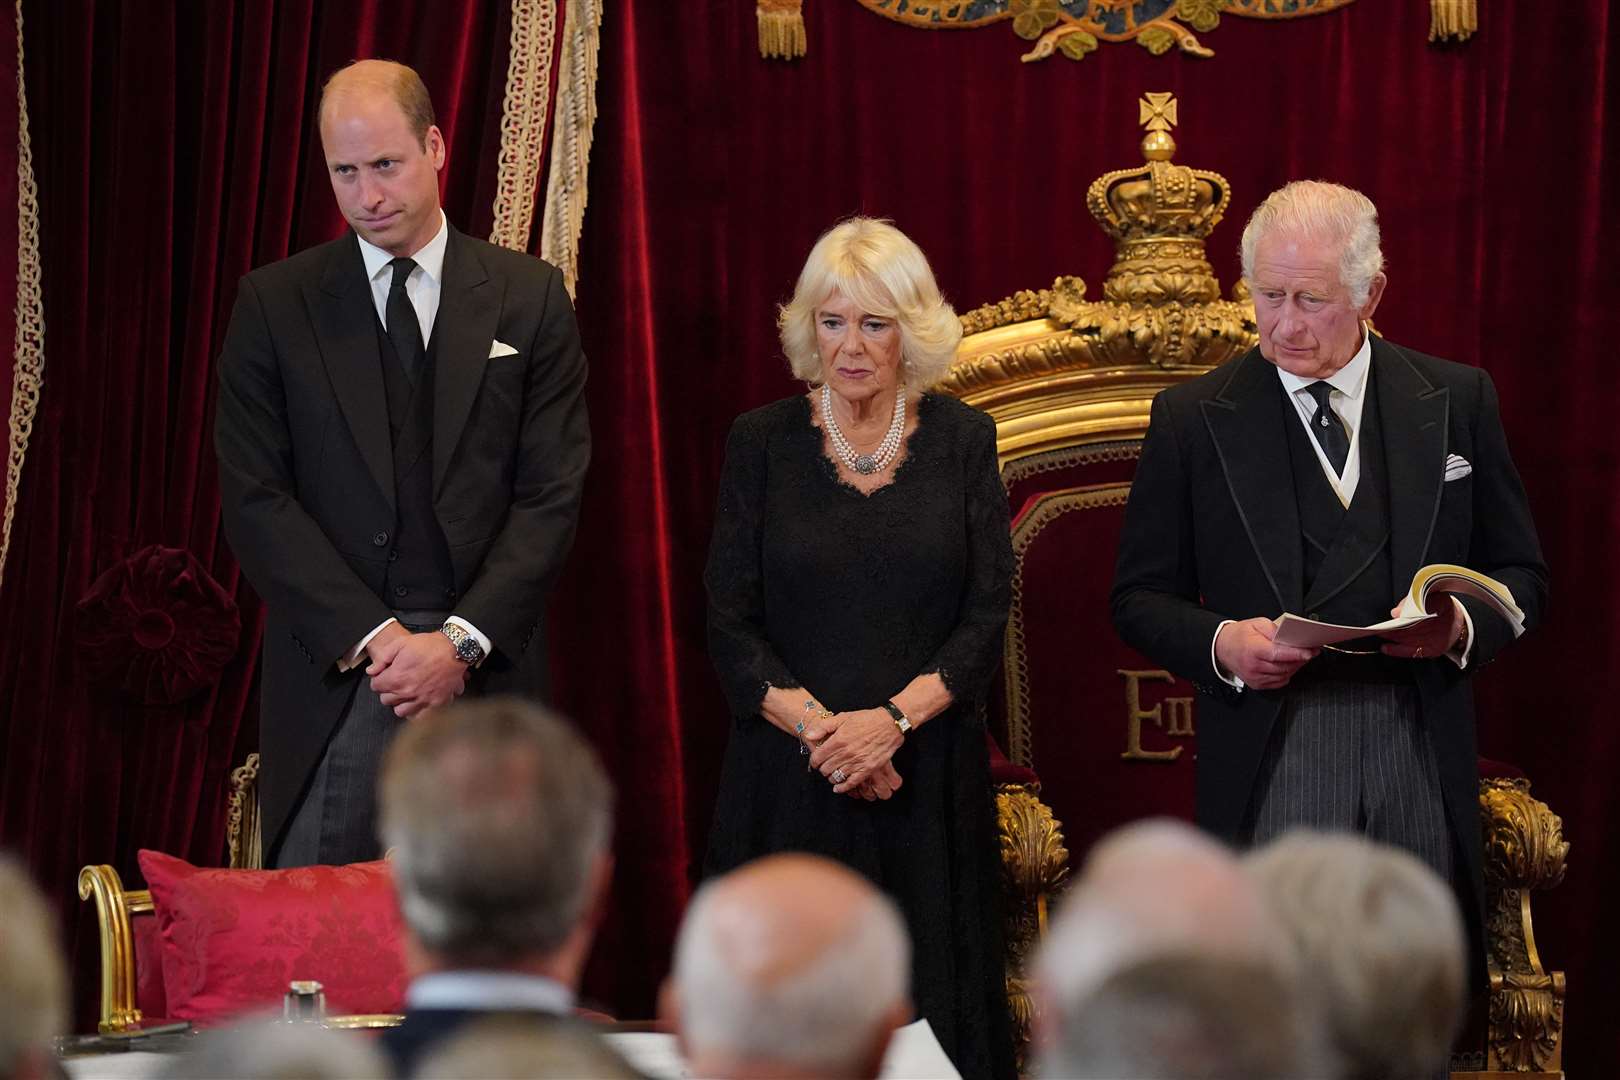 King Charles III and the Queen with the new Prince of Wales during the Accession Council at St James’s Palace (Victoria Jones/PA)